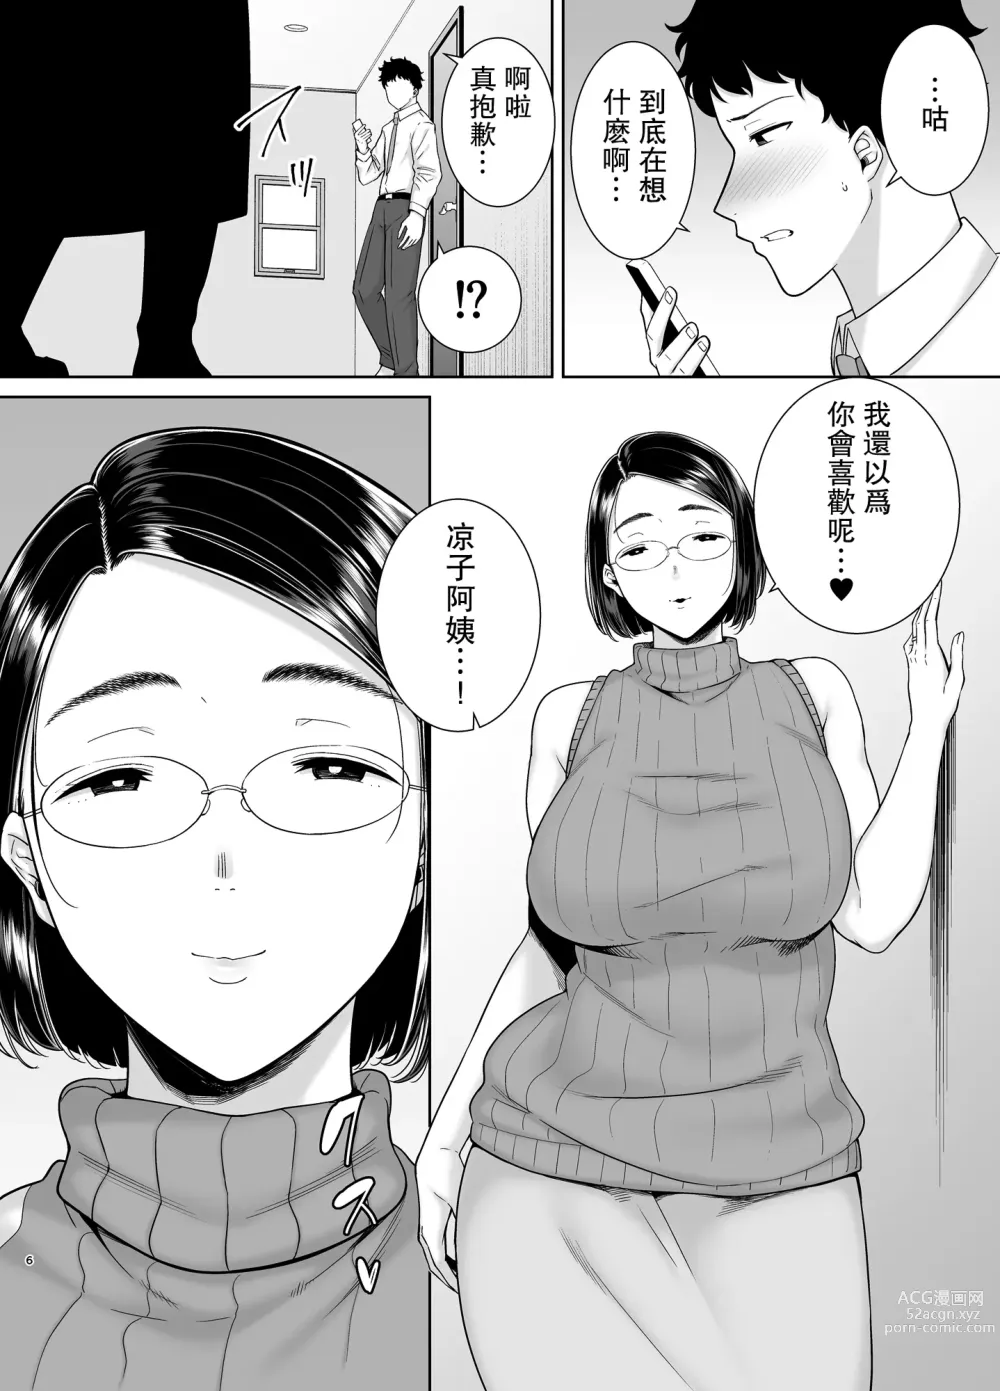 Page 5 of doujinshi KanoMama Syndrome 2 Glass.ver